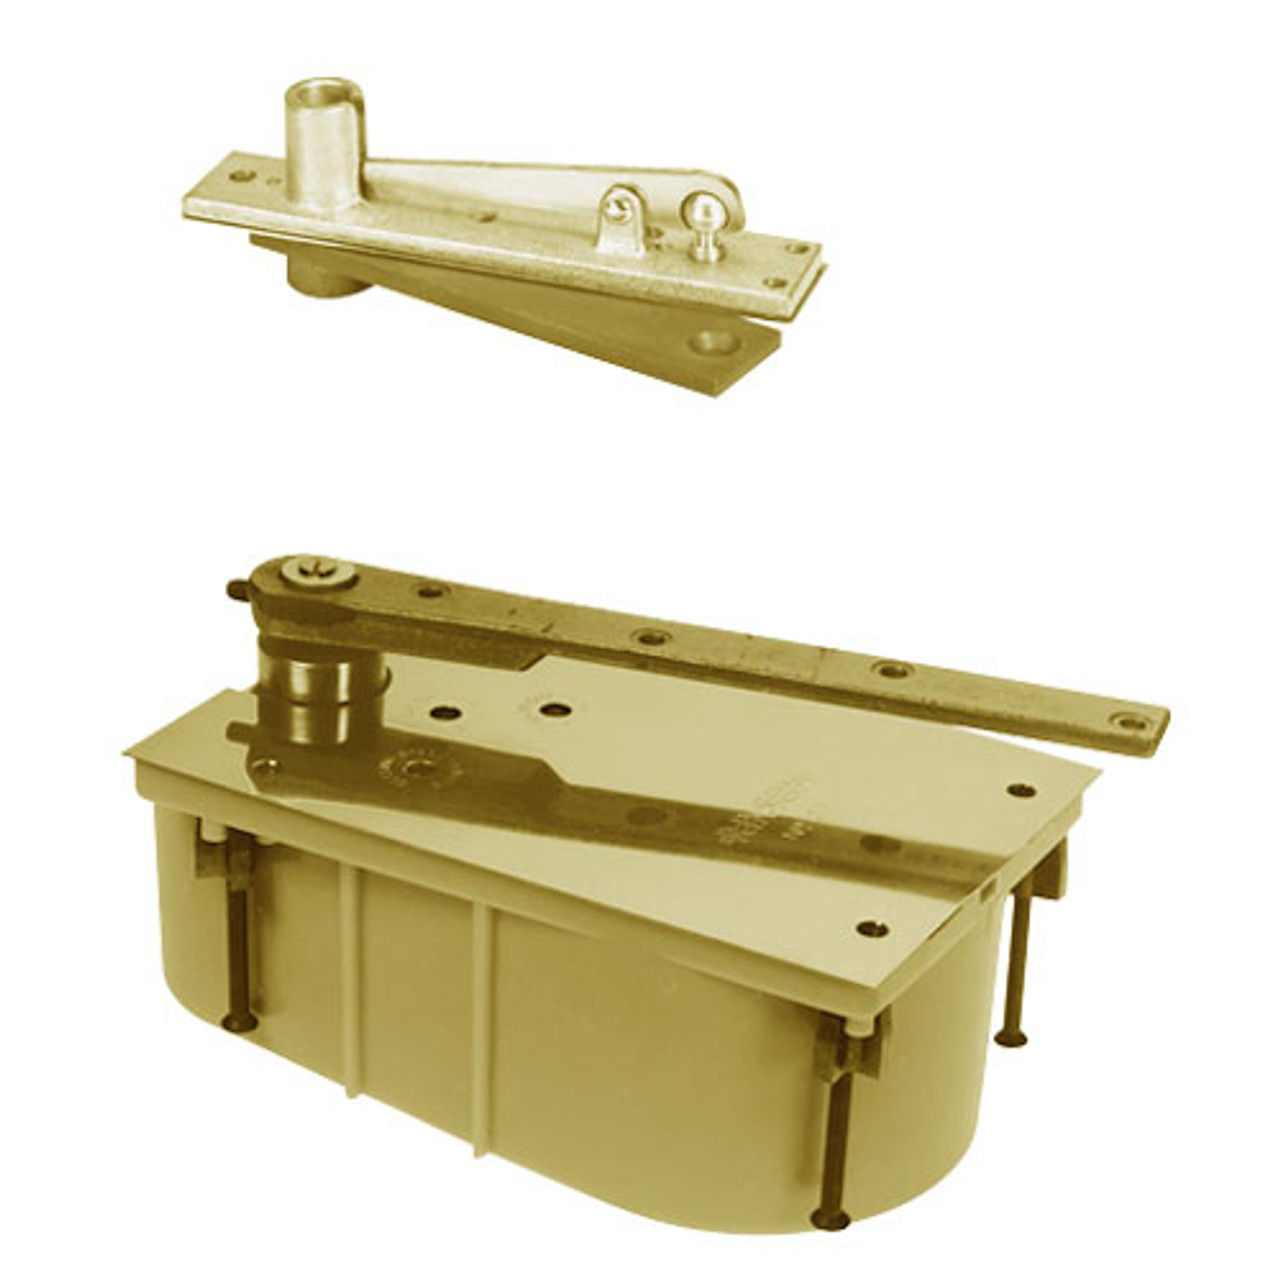 28-95N-554-LFP-LH-606 Rixson 28 Series Heavy Duty Single Acting Center Hung Floor Closer with Concealed Arm in Satin Brass Finish